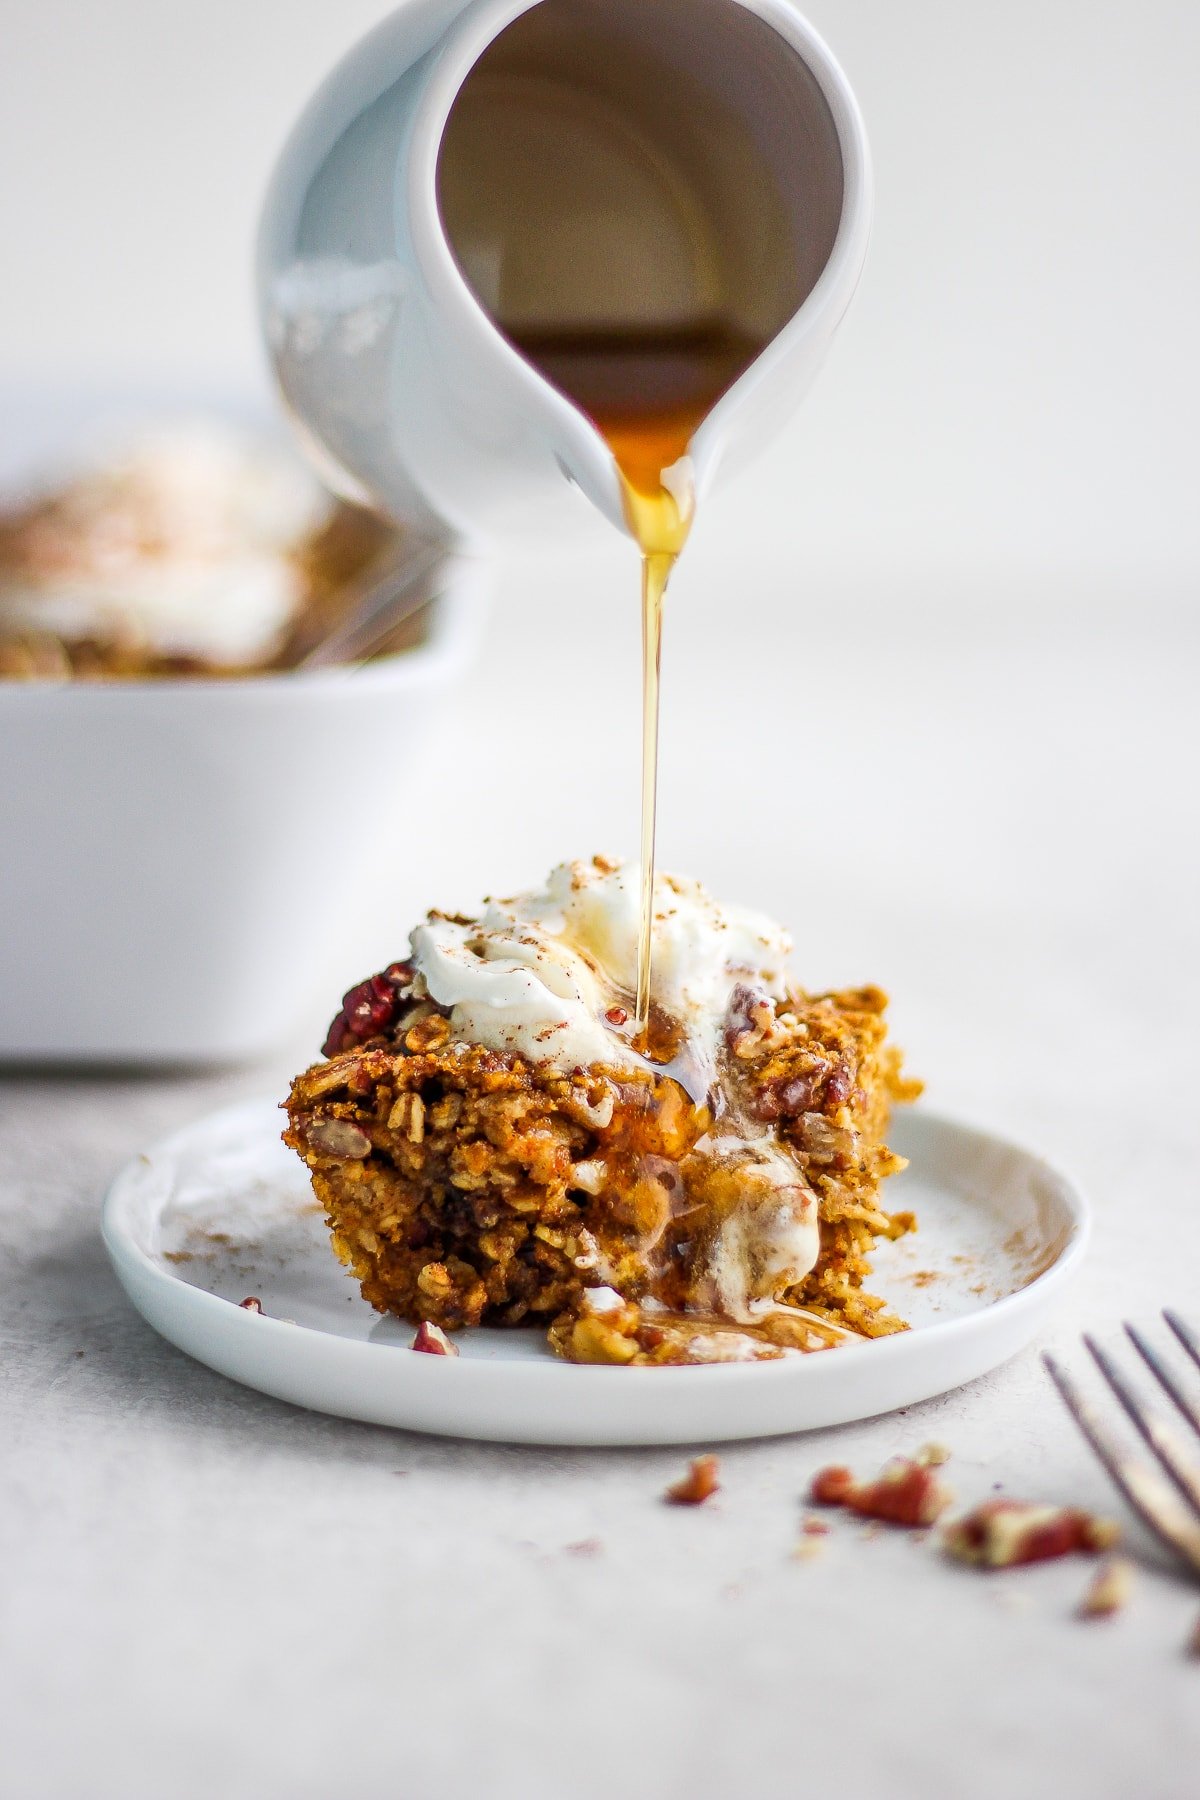 The best recipe for a pumpkin baked oatmeal.